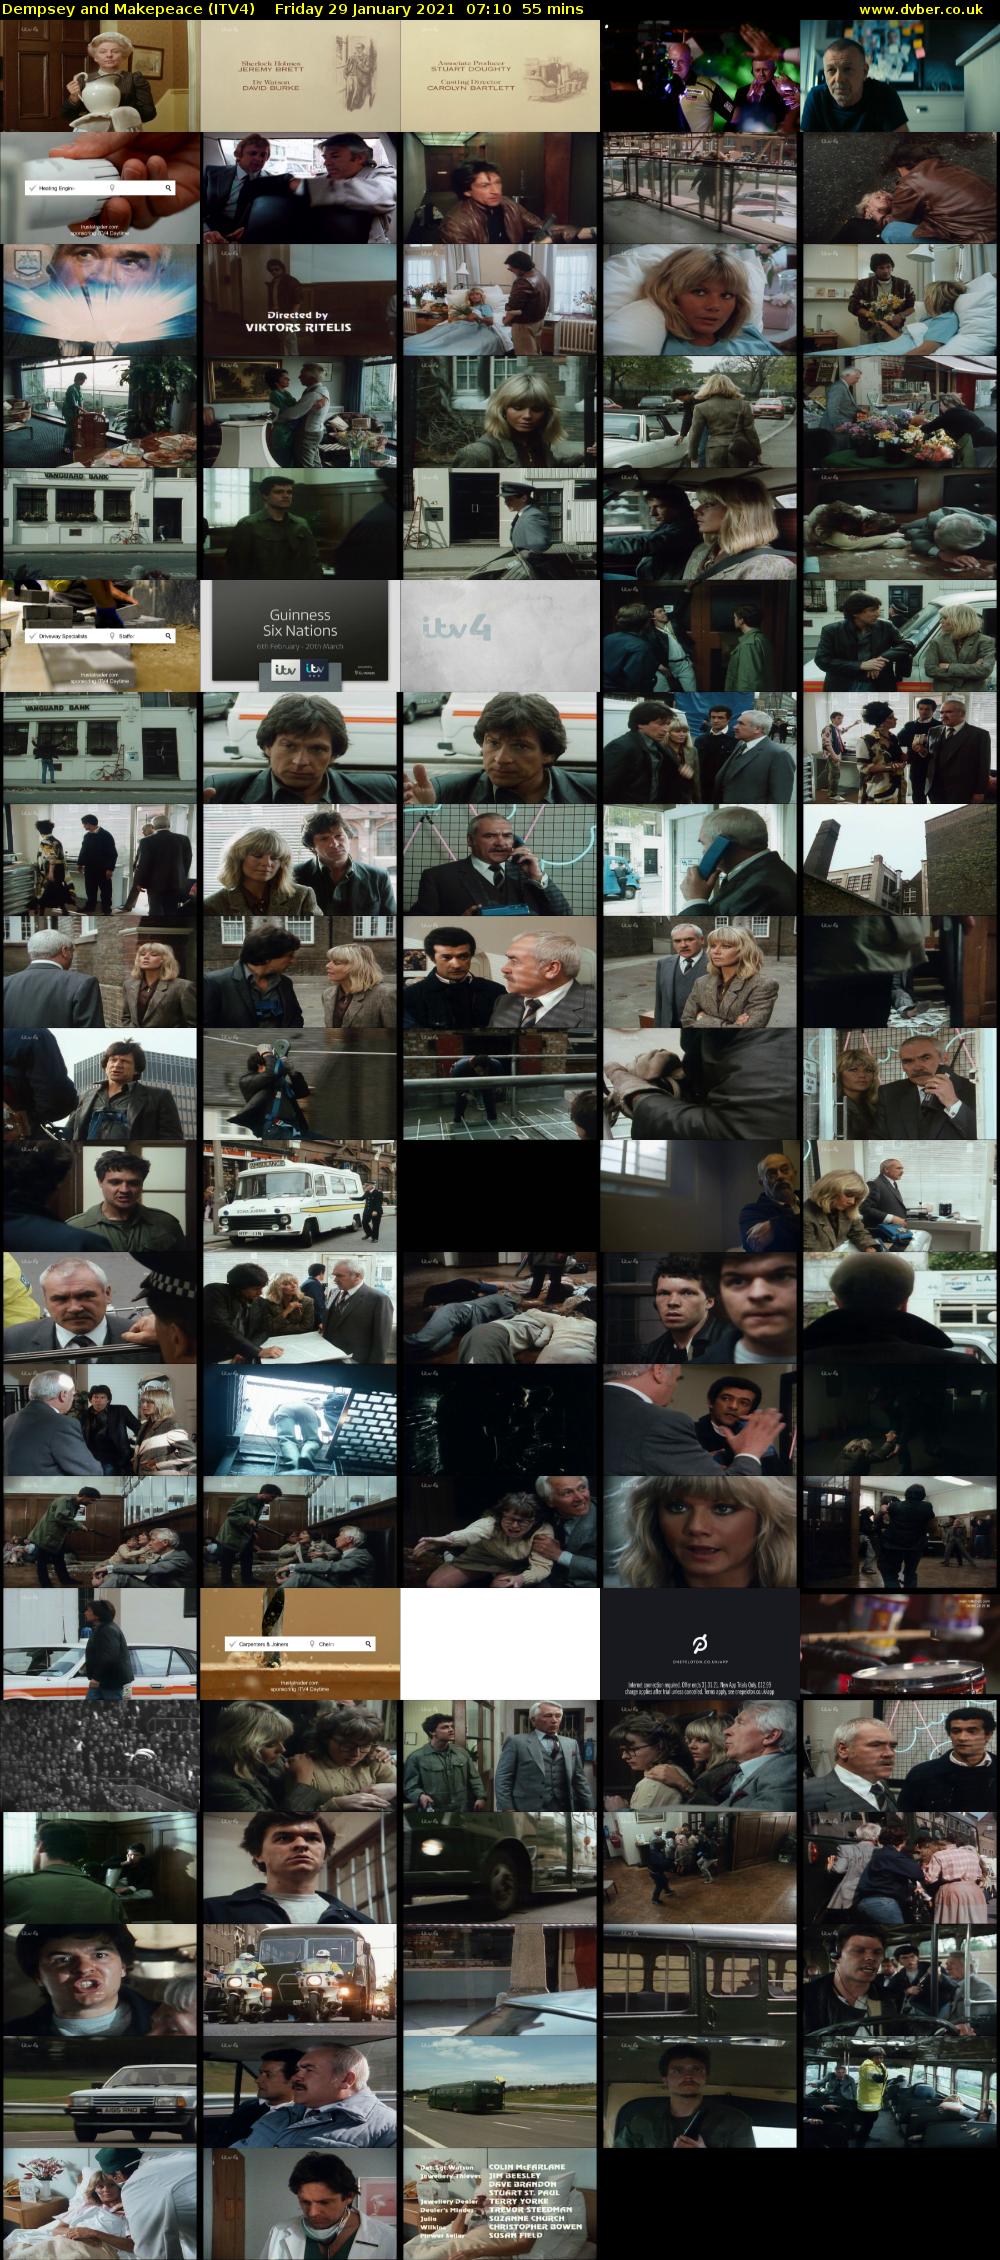 Dempsey and Makepeace (ITV4) Friday 29 January 2021 07:10 - 08:05